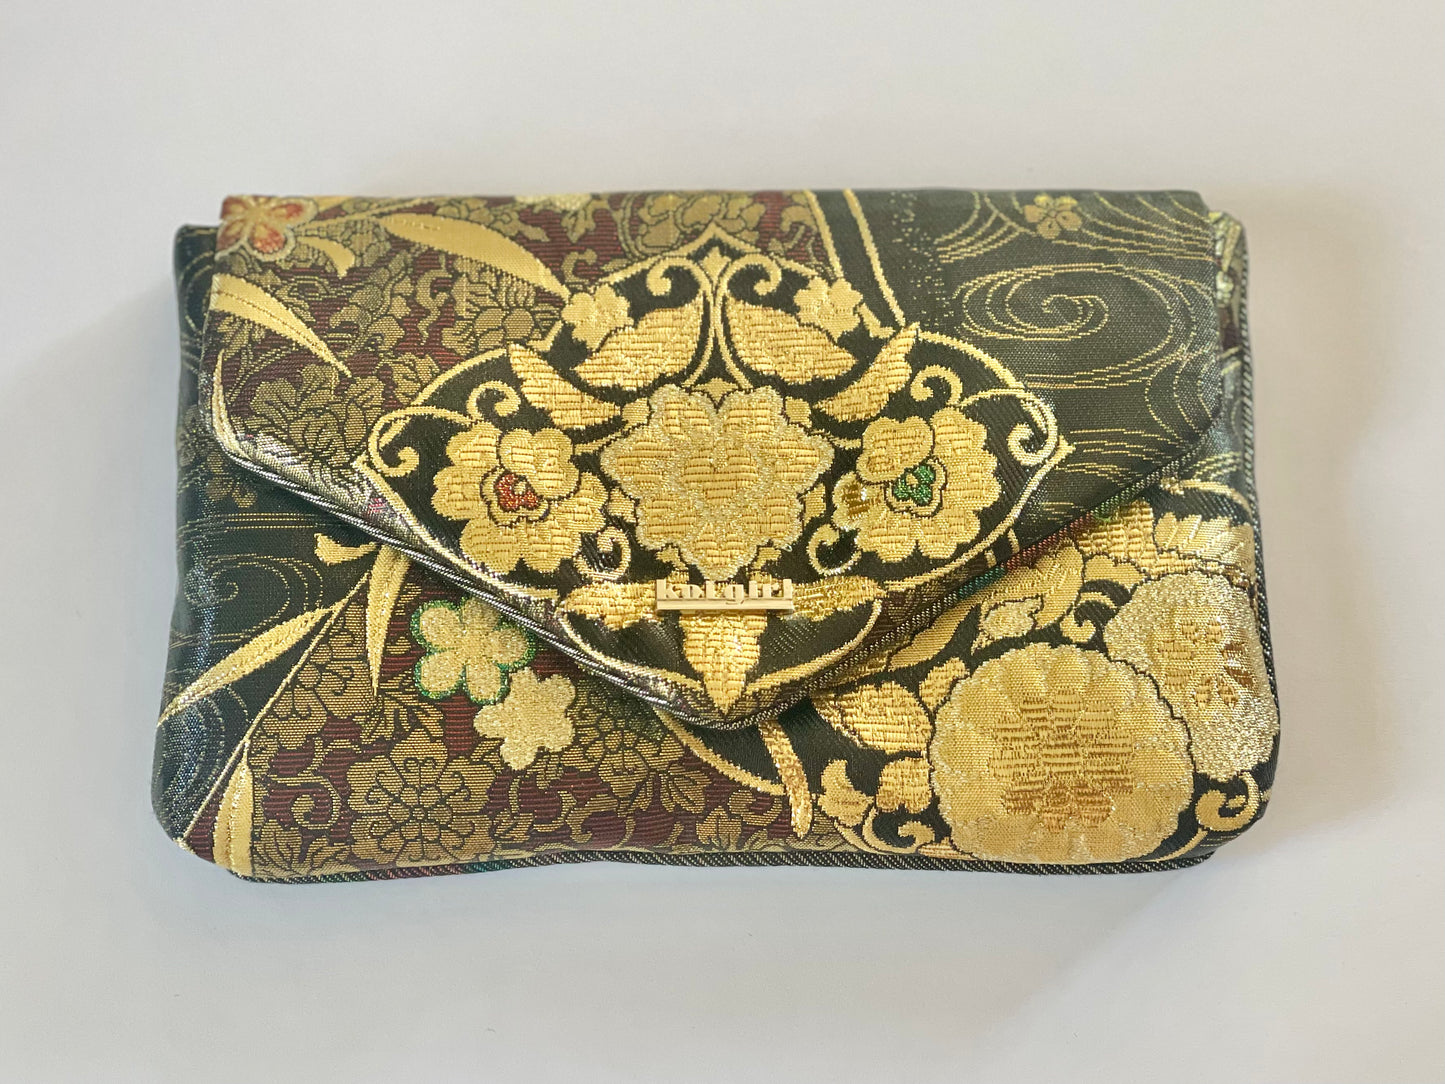 Black and Gold Metallic Floral Clutch